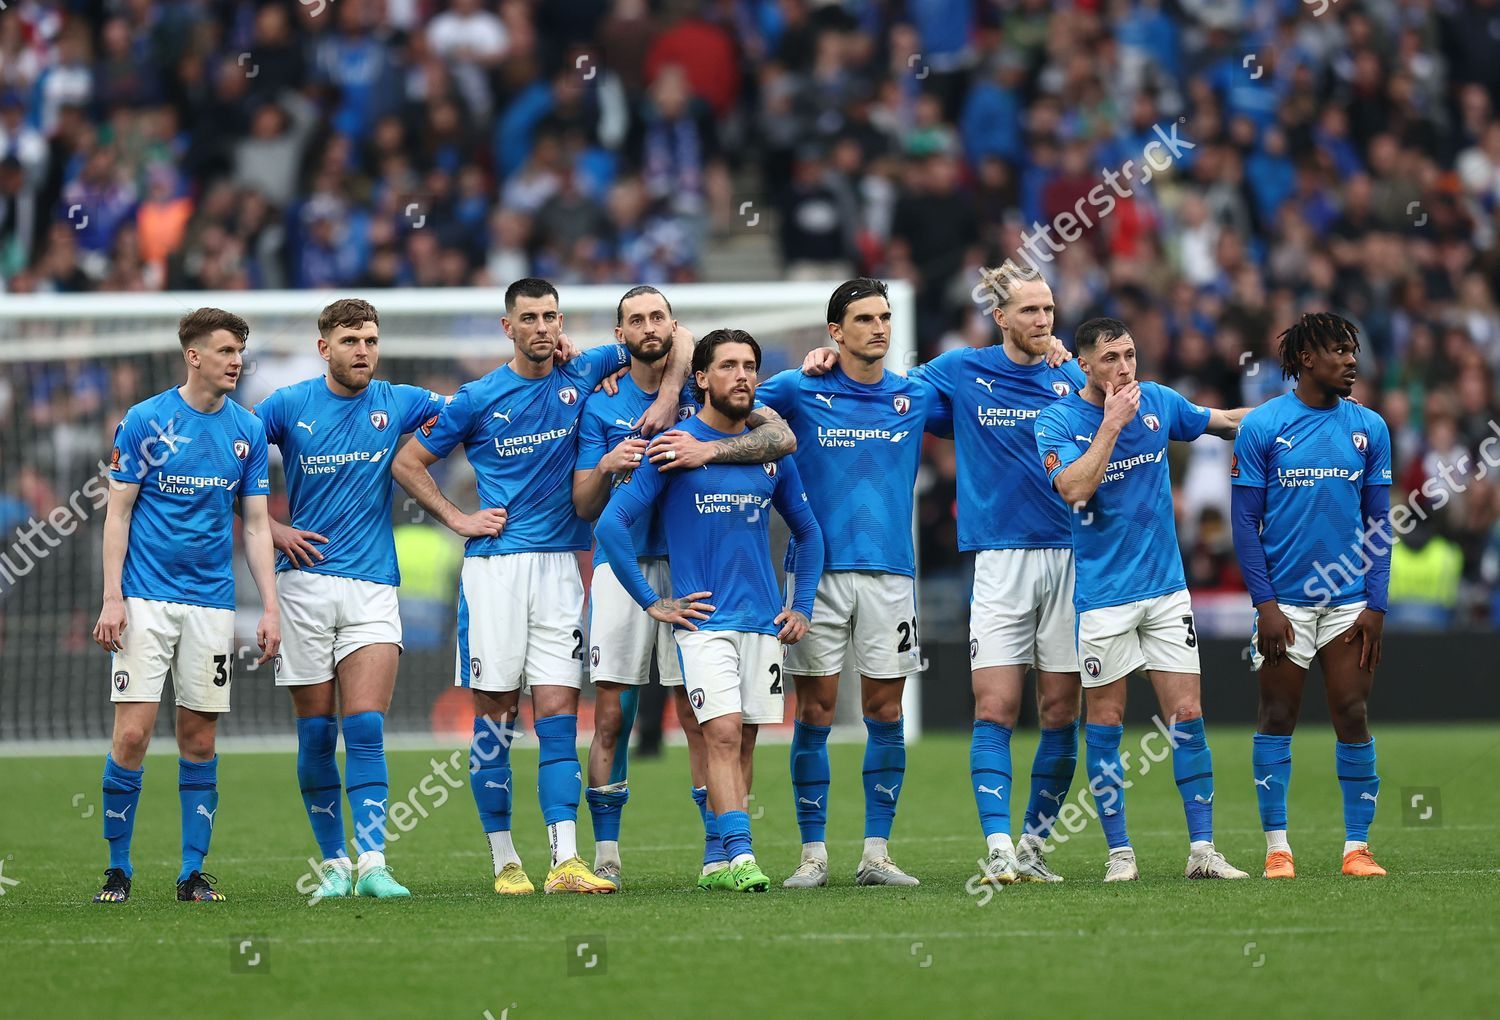 Players Chesterfield Look Dejected During Penalty Editorial Stock Photo -  Stock Image | Shutterstock